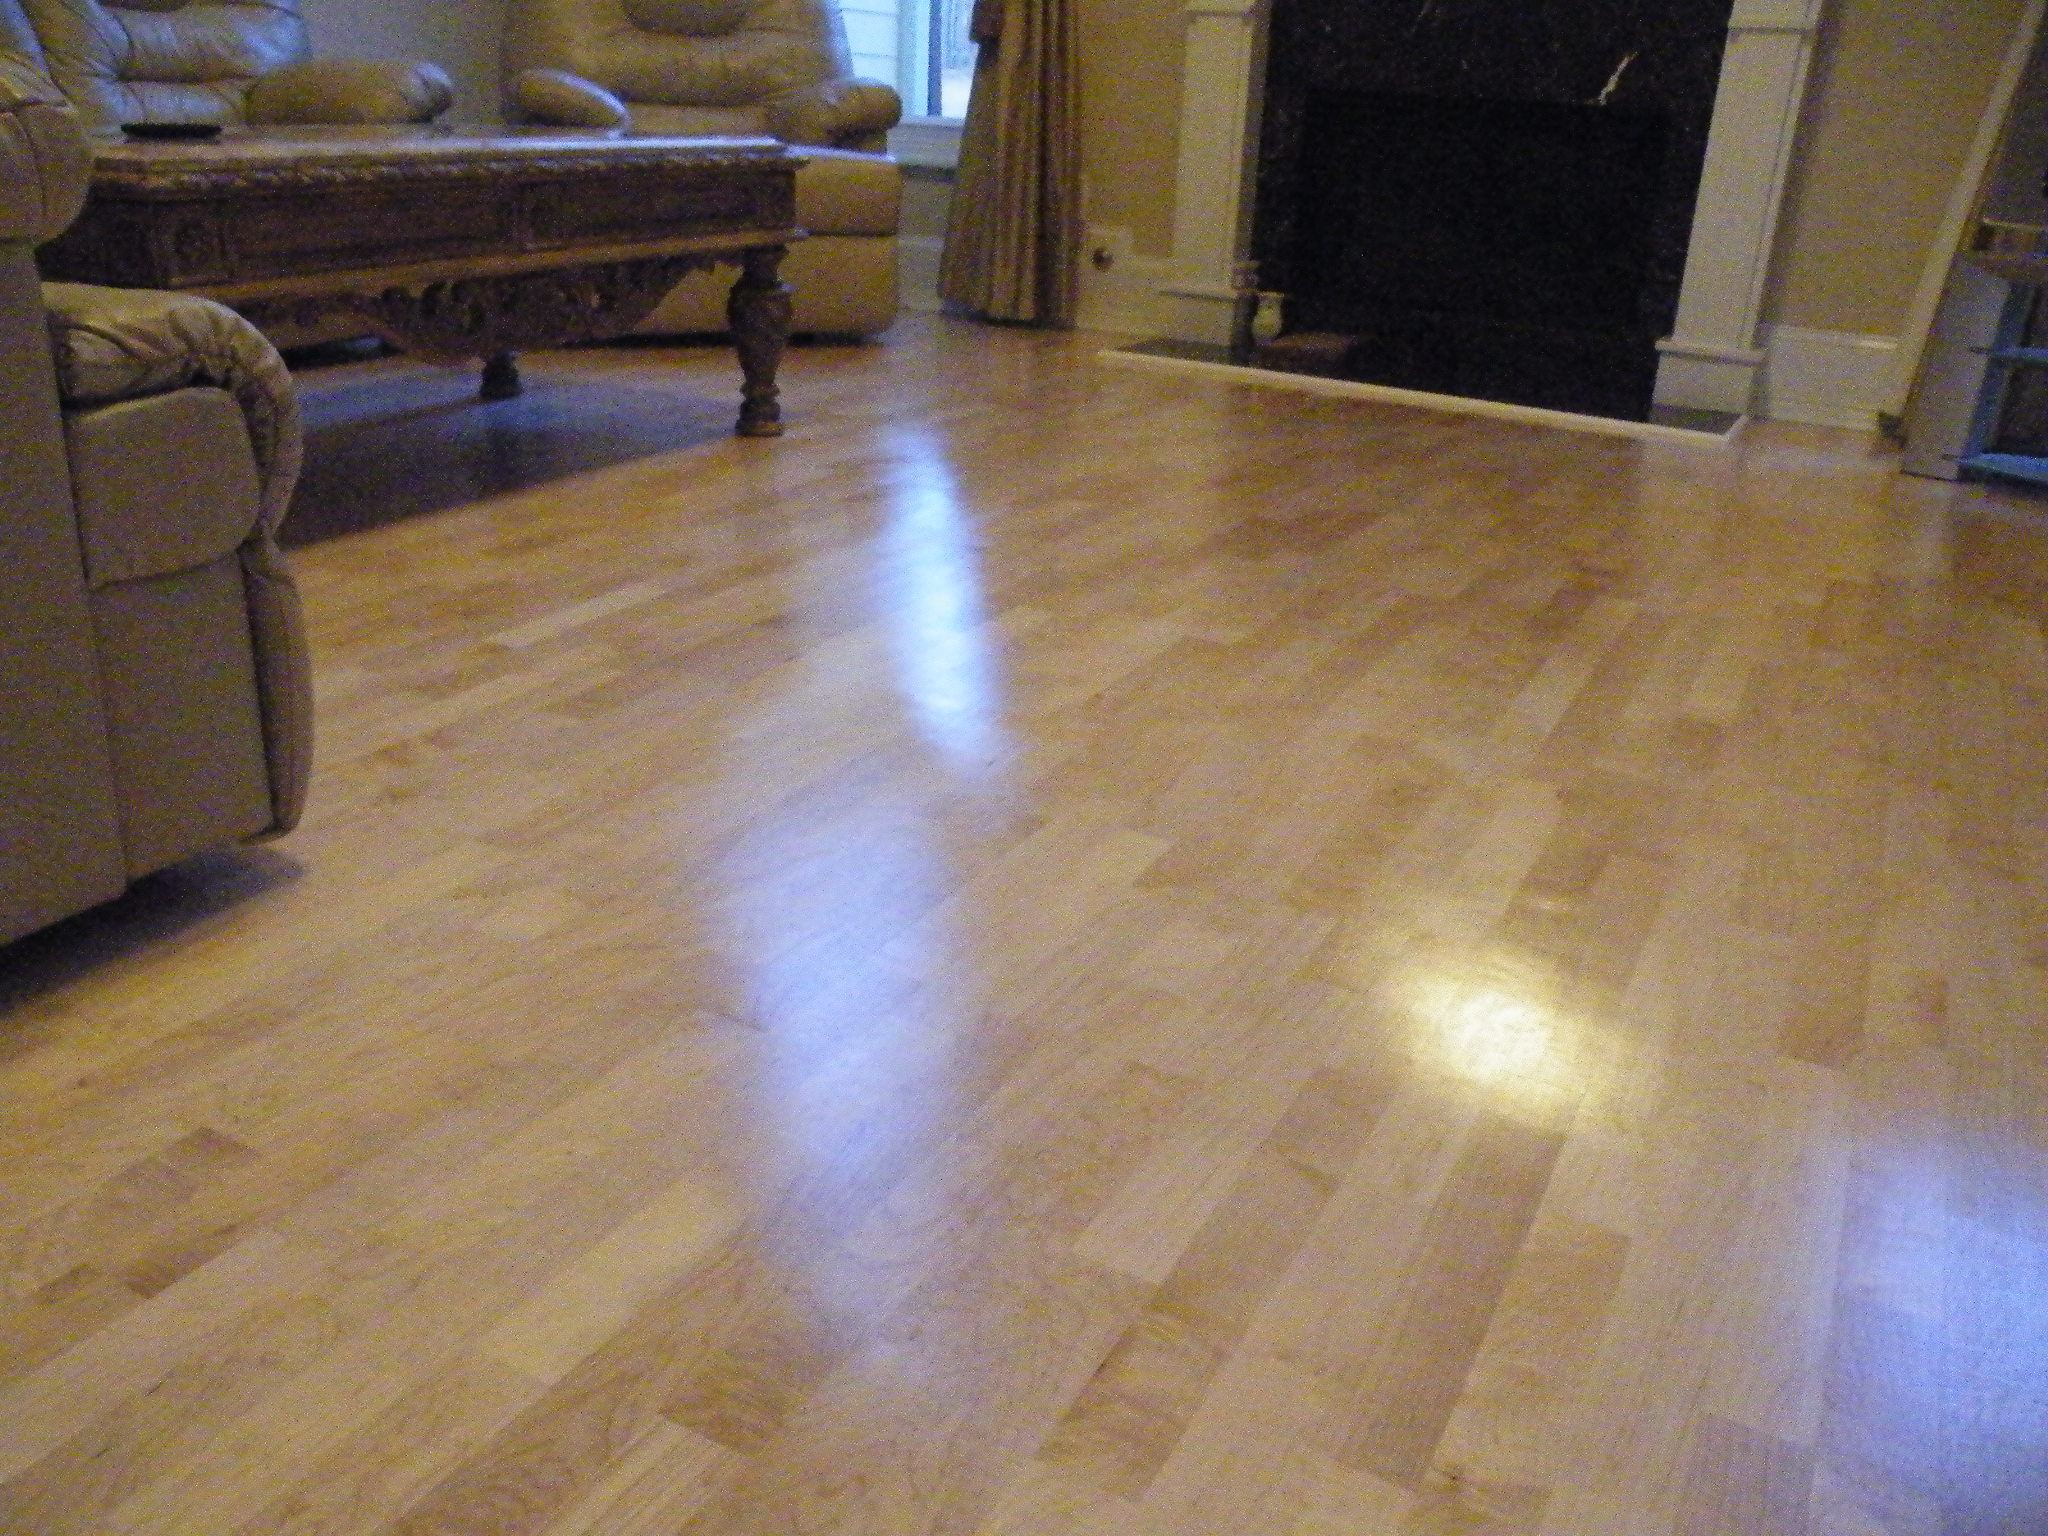 Hardwood floor installation and refinishing in Lawrenceville, GA - After